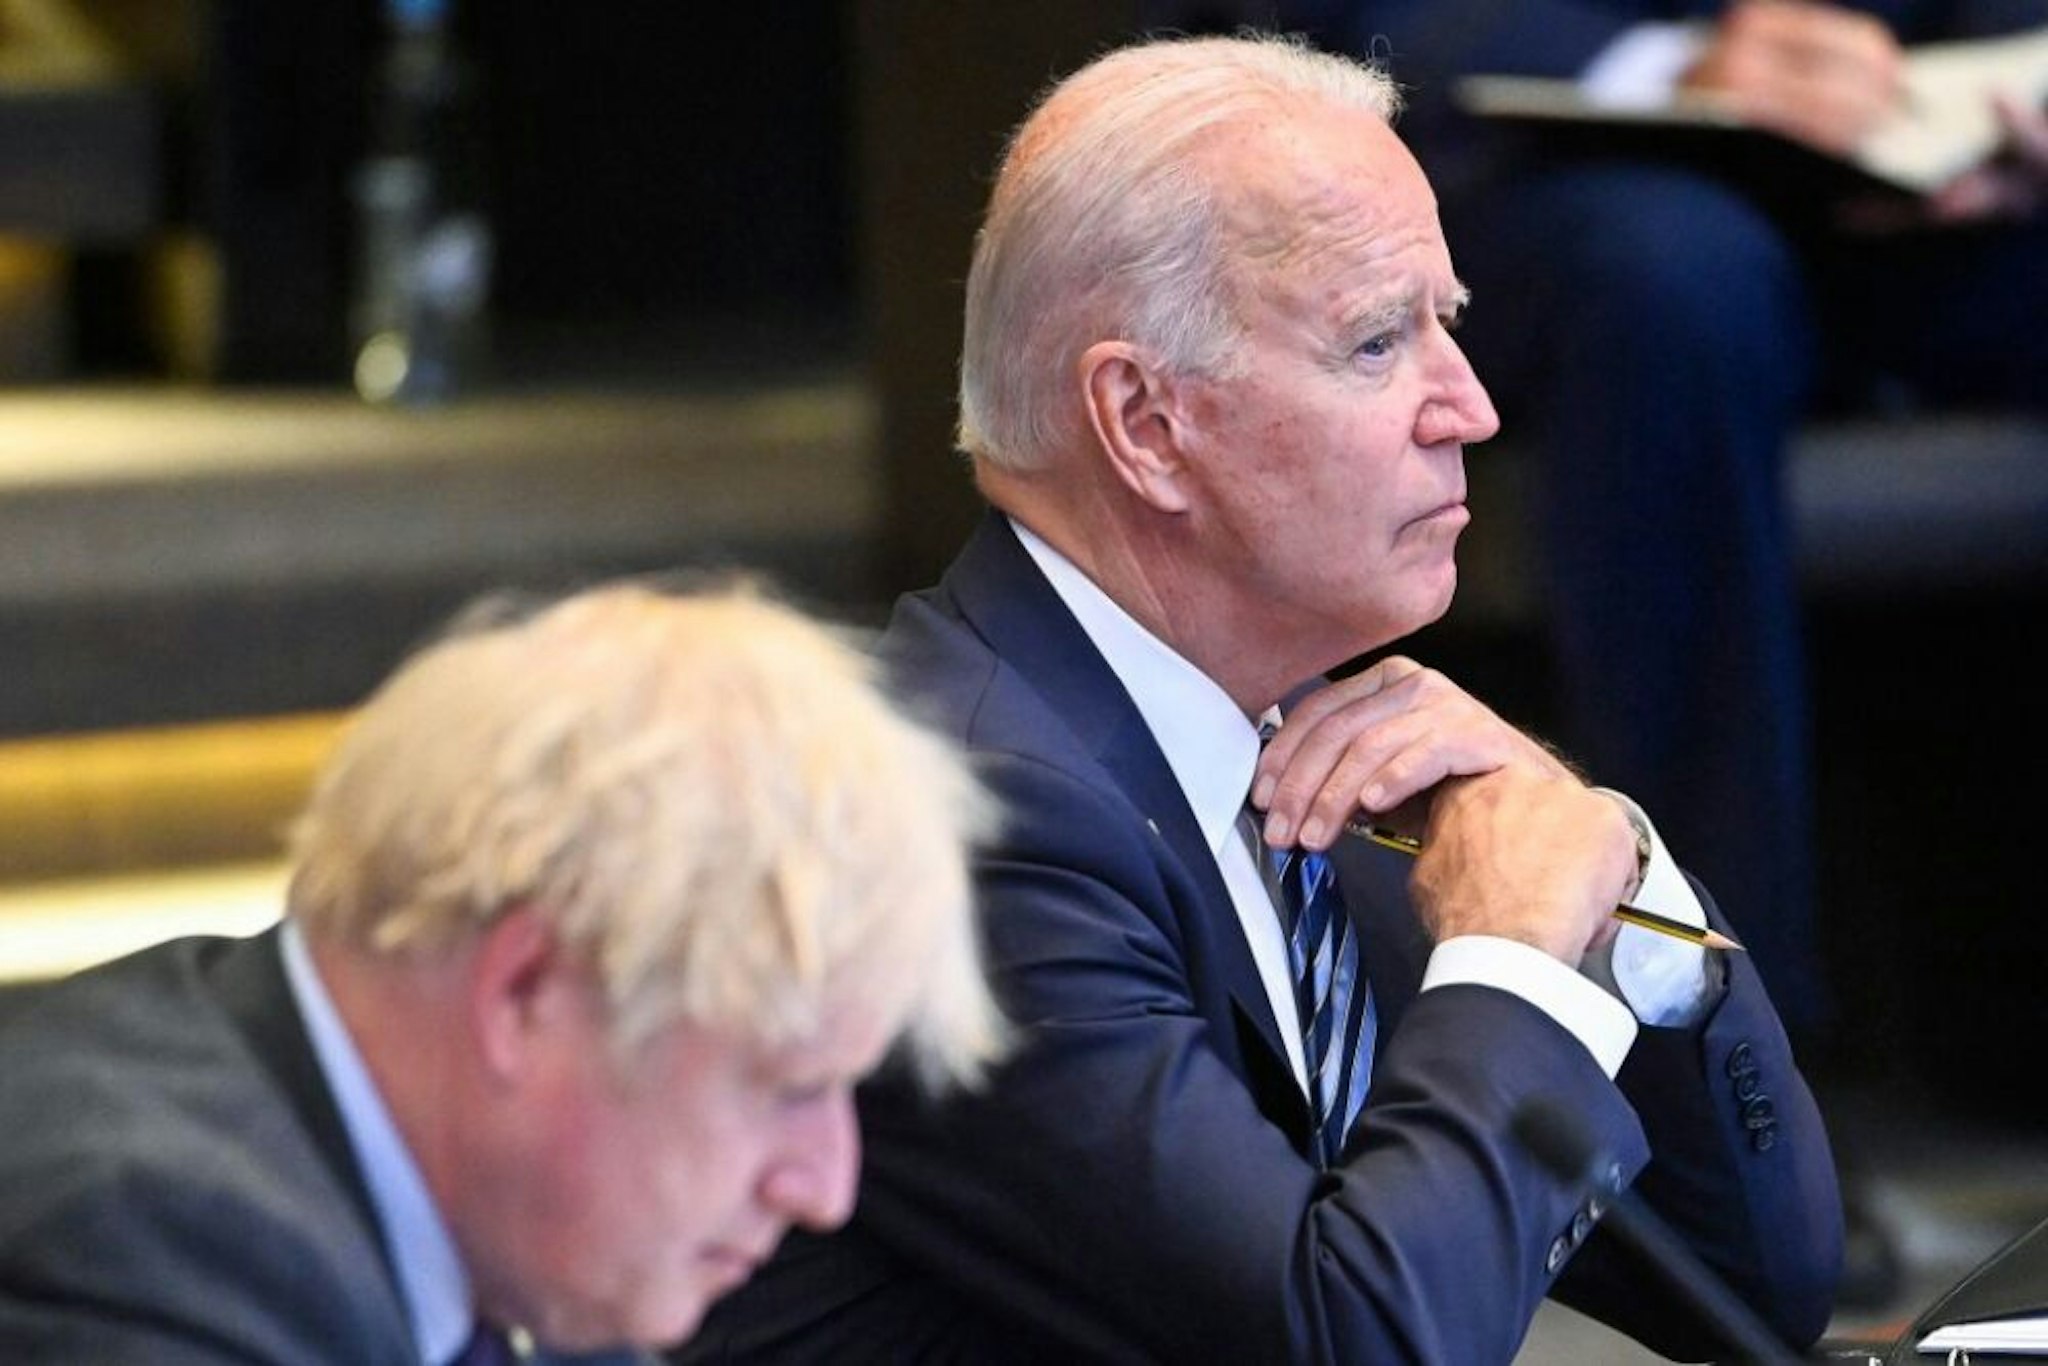 US President Joe Biden (R) and Britain's Prime Minister Boris Johnson (L) attend a plenary session of a NATO summit at the North Atlantic Treaty Organization (NATO) headquarters in Brussels, on June 14, 2021. - The allies will agree a statement stressing common ground on securing their withdrawal from Afghanistan, joint responses to cyber attacks and relations with a rising China. - Belgium OUT